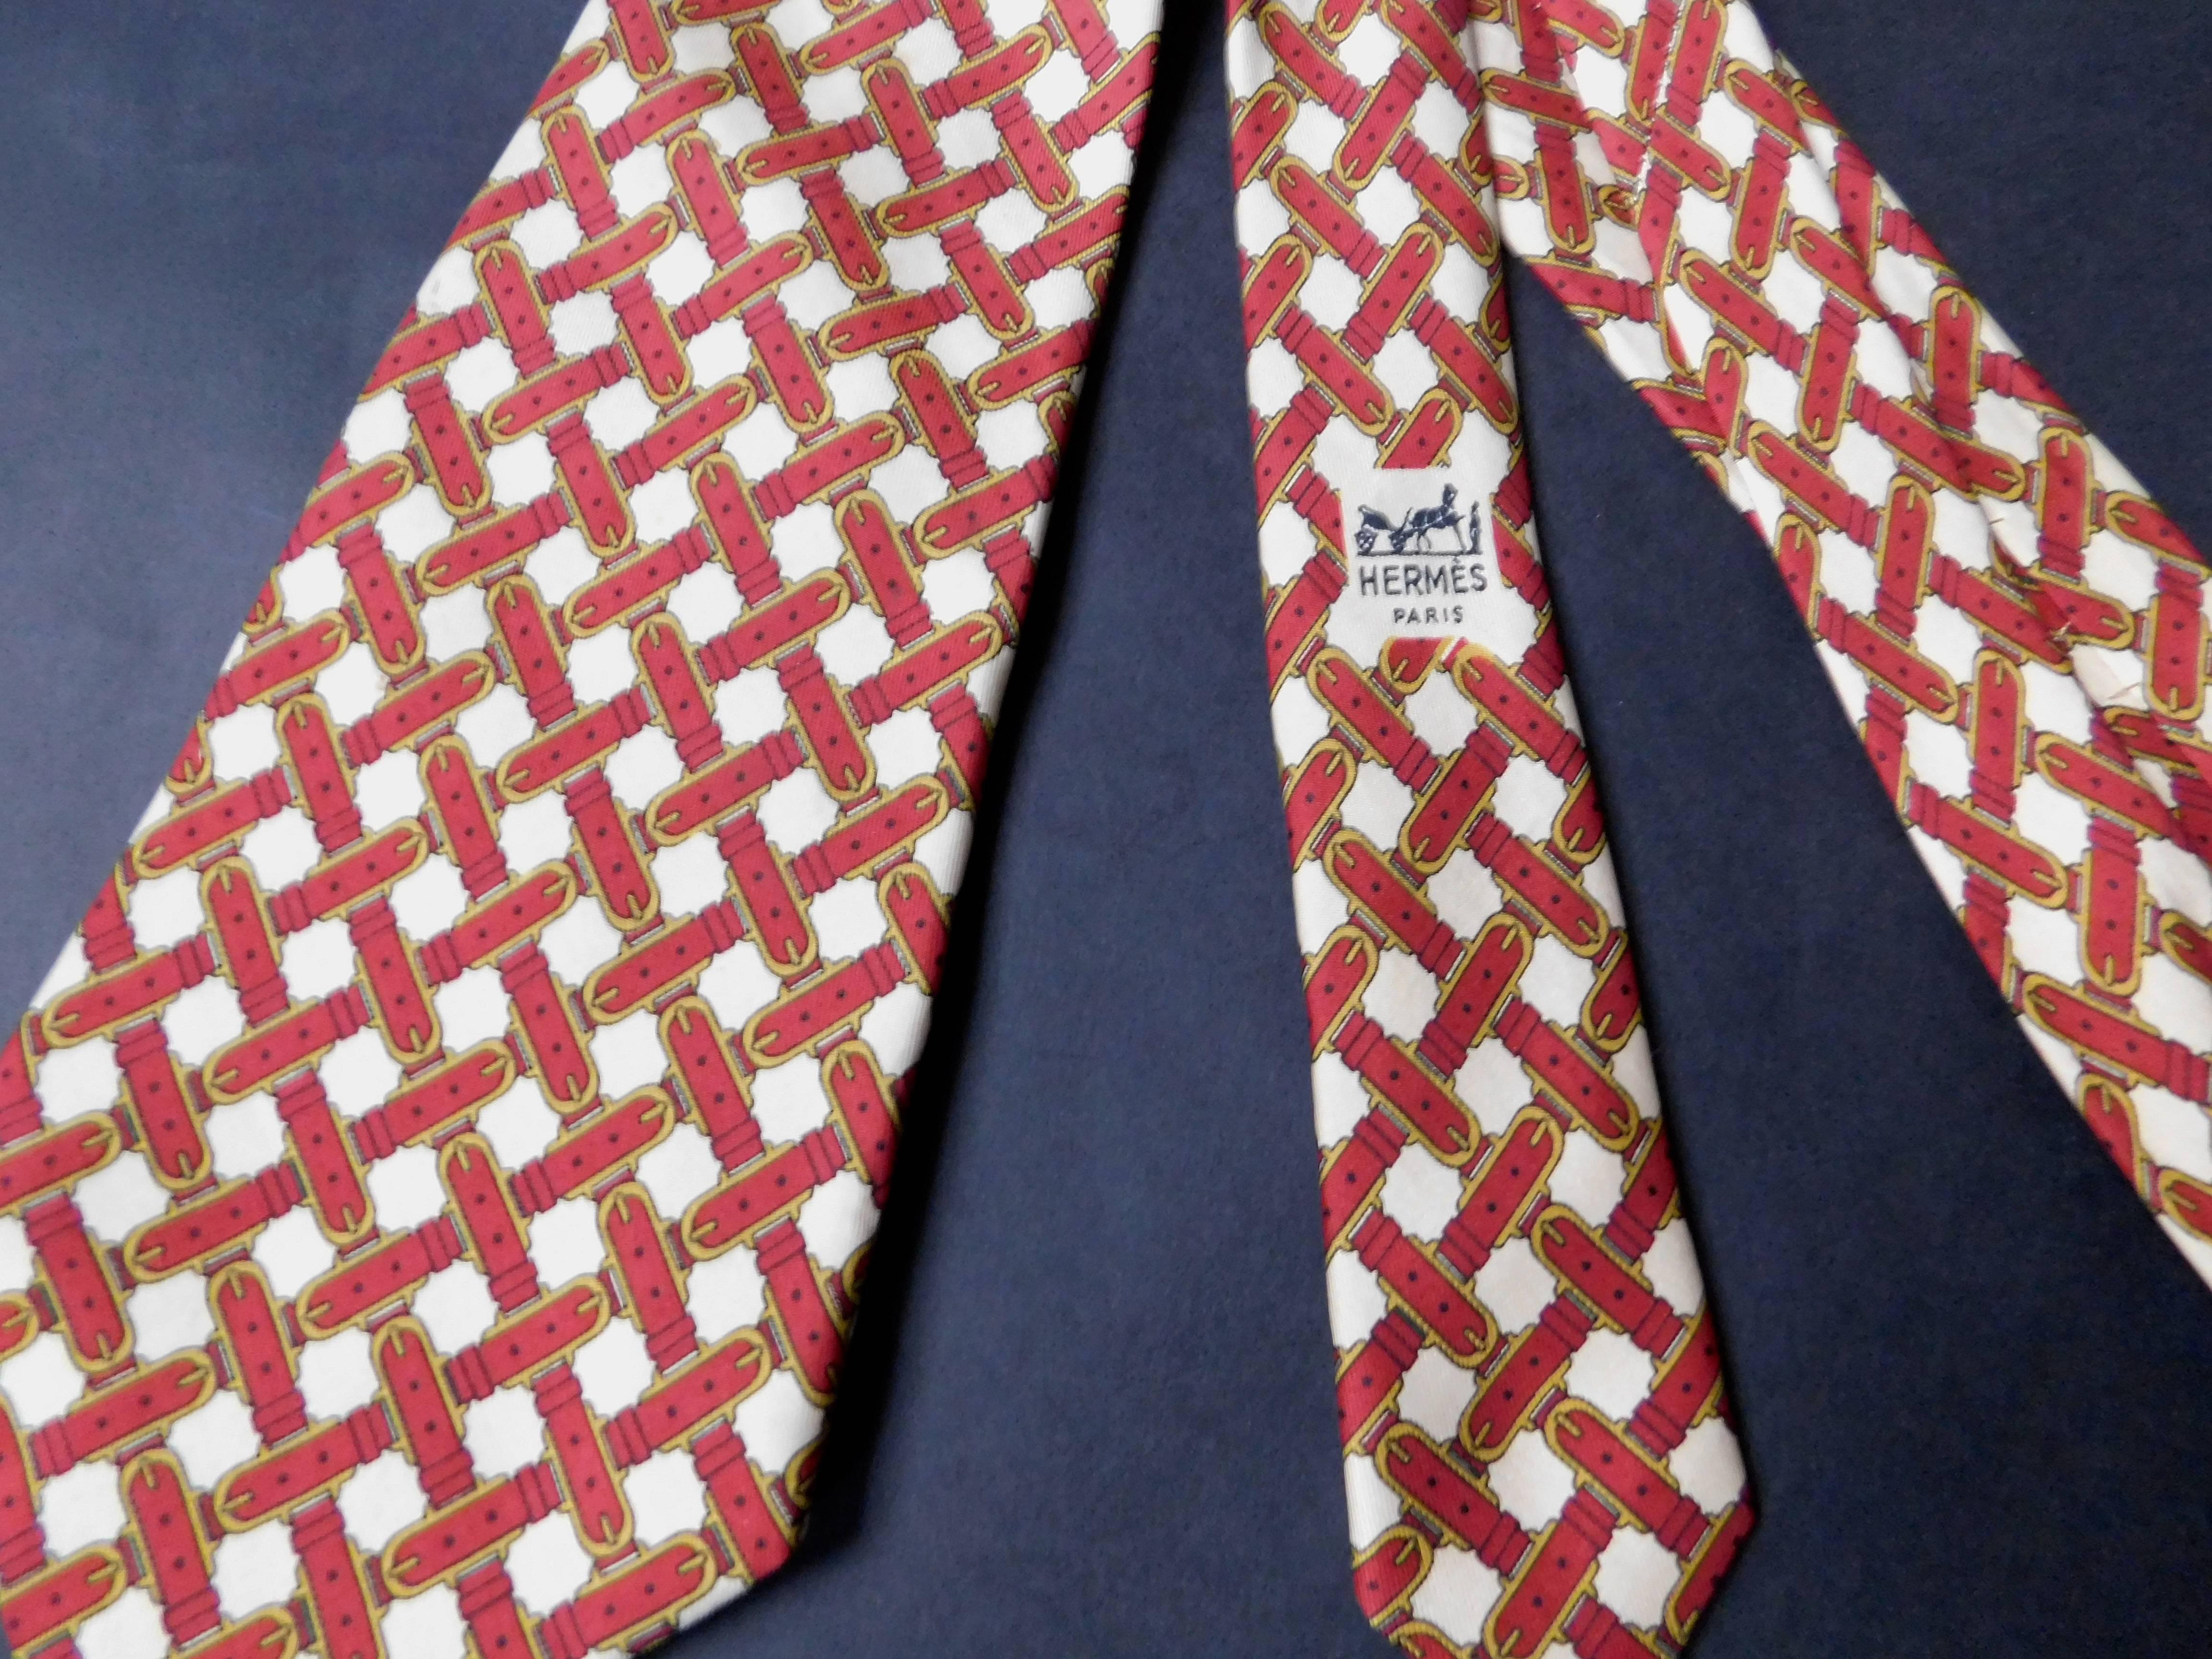 A vintage hermes mens silk tie printed overall pattern of woven stirrup buckles. Classic width and colors of cream and burgundy. Wear it as a tie or  as a sash with jeans .
The bottom width =11 cm
mid width =7cm.